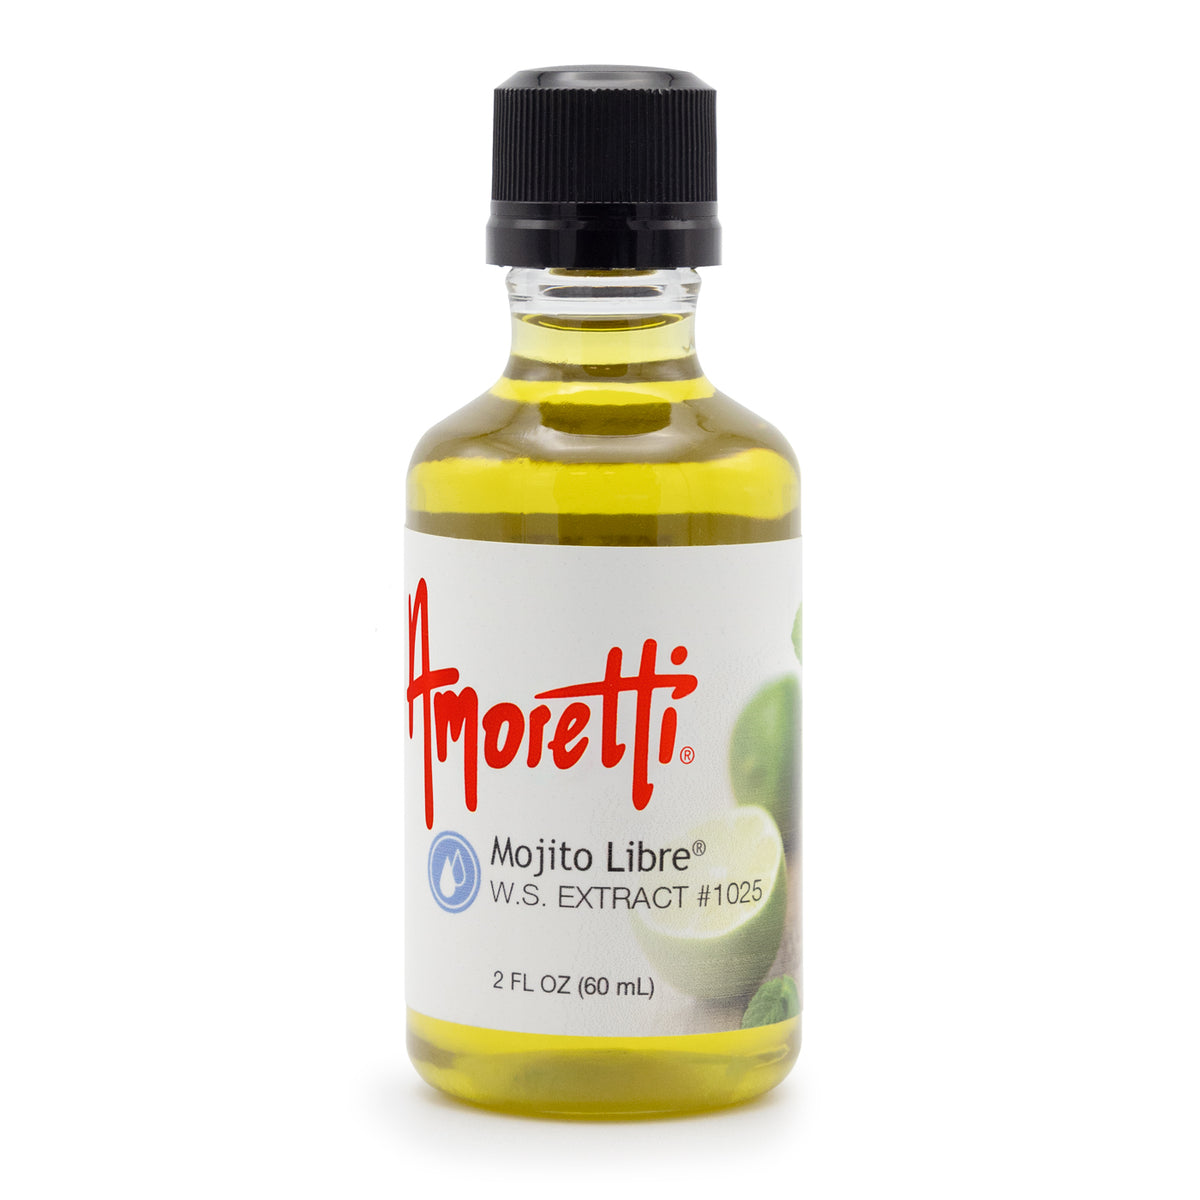 Mojito Libre Extract (mint & Water — Amoretti Soluble lime)